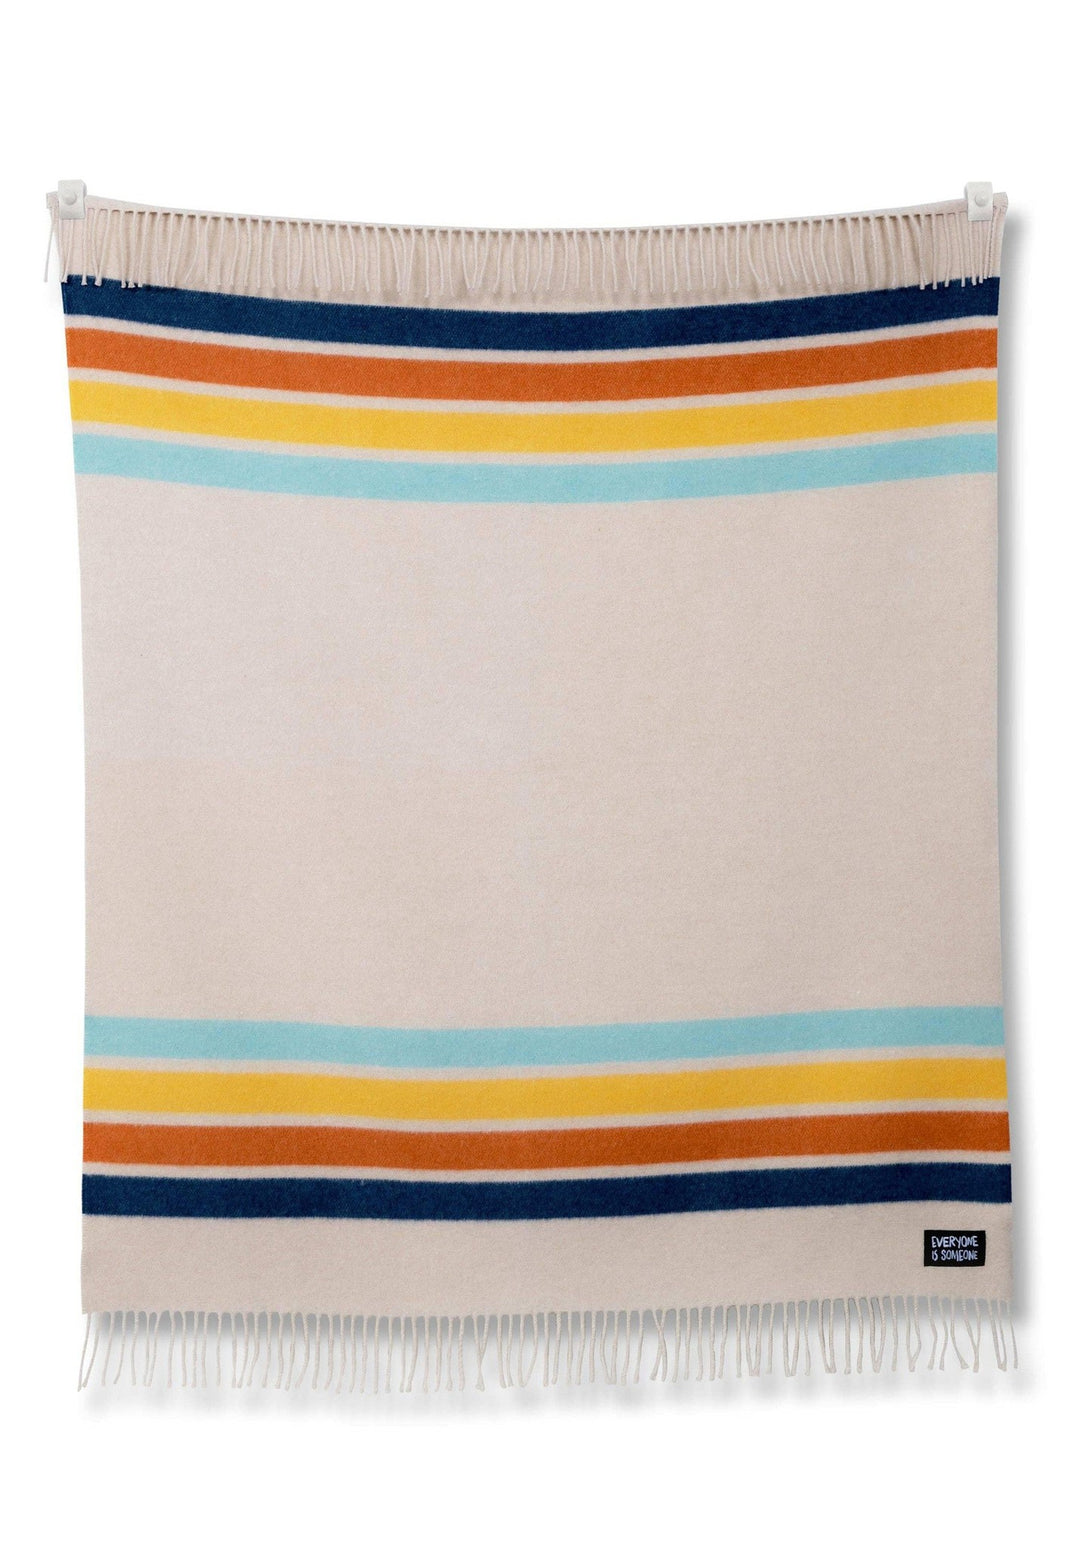 A beige and blue striped KIDS Camp Coast blanket hanging on a white wall by Sackcloth & Ashes.